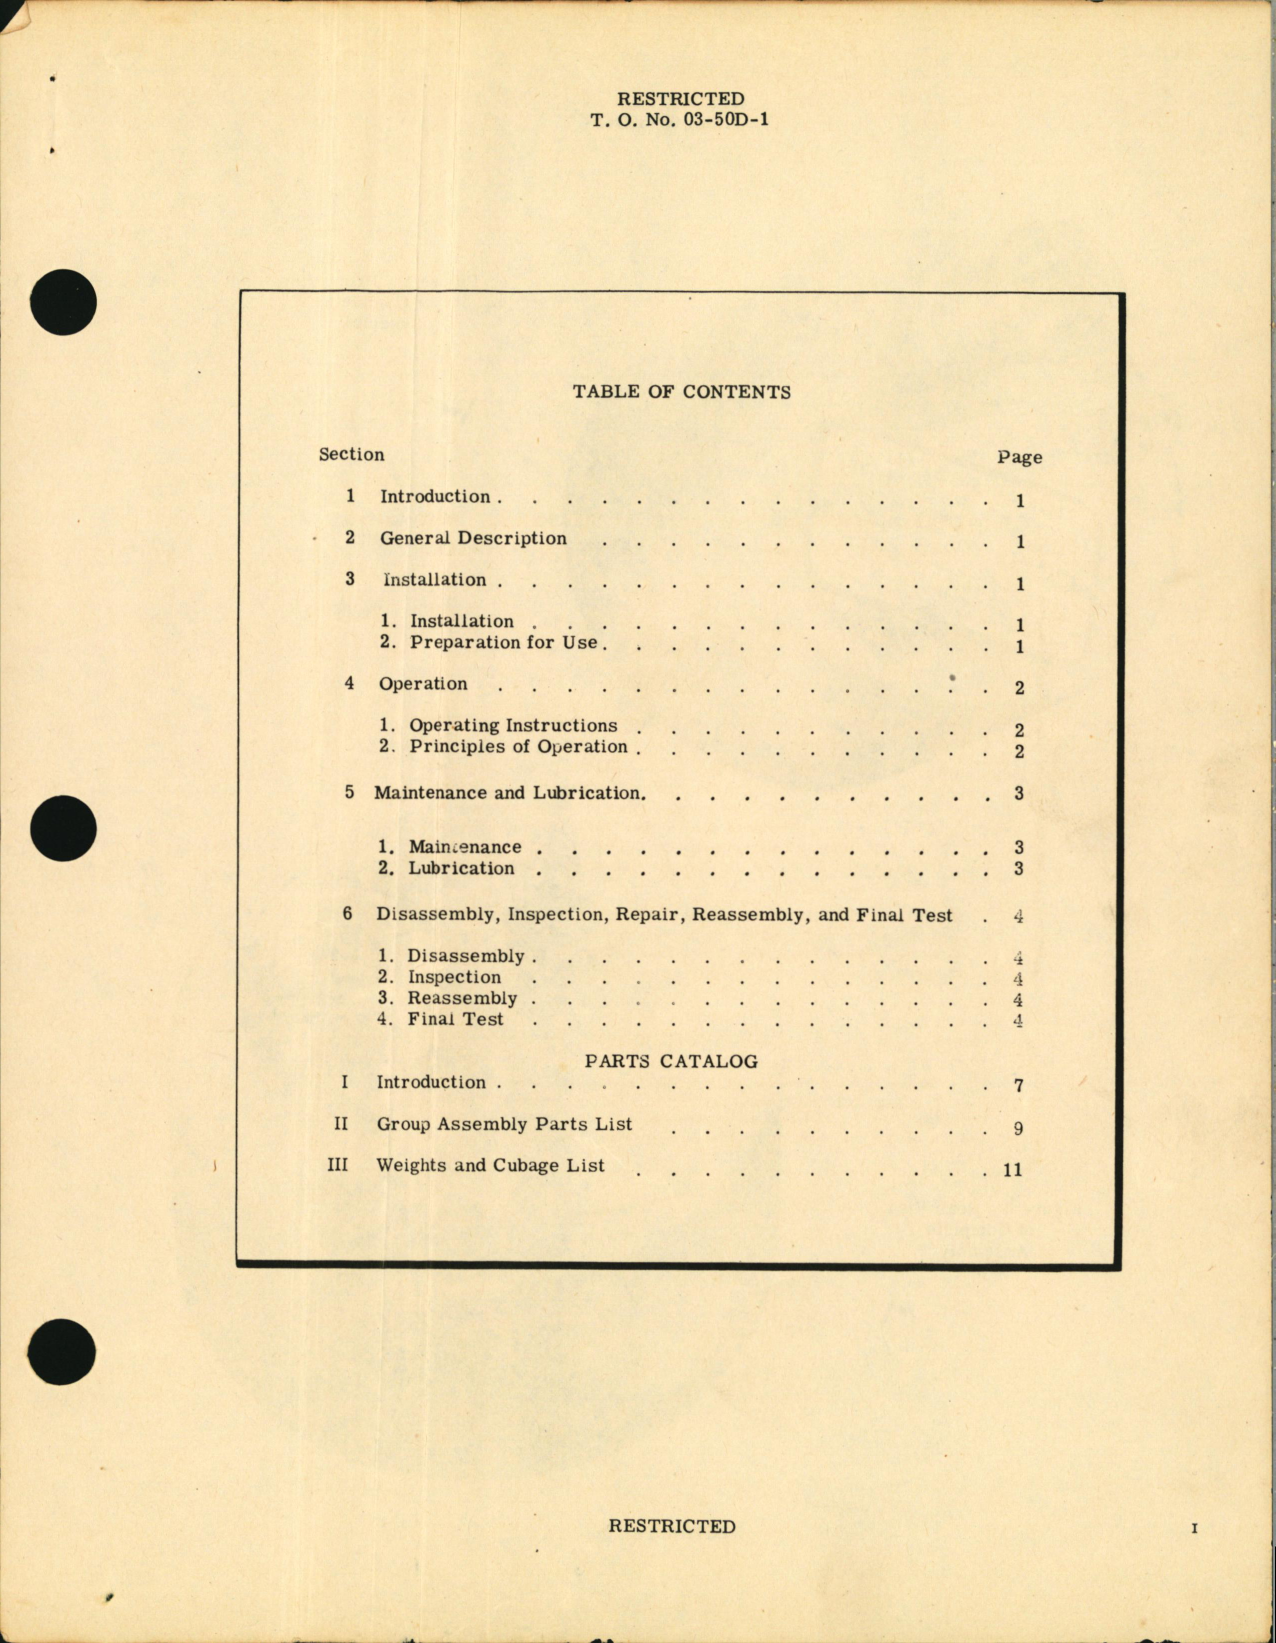 Sample page 5 from AirCorps Library document: Handbook of Instructions with Parts Catalog for Oxygen Pressure Signal Assembly